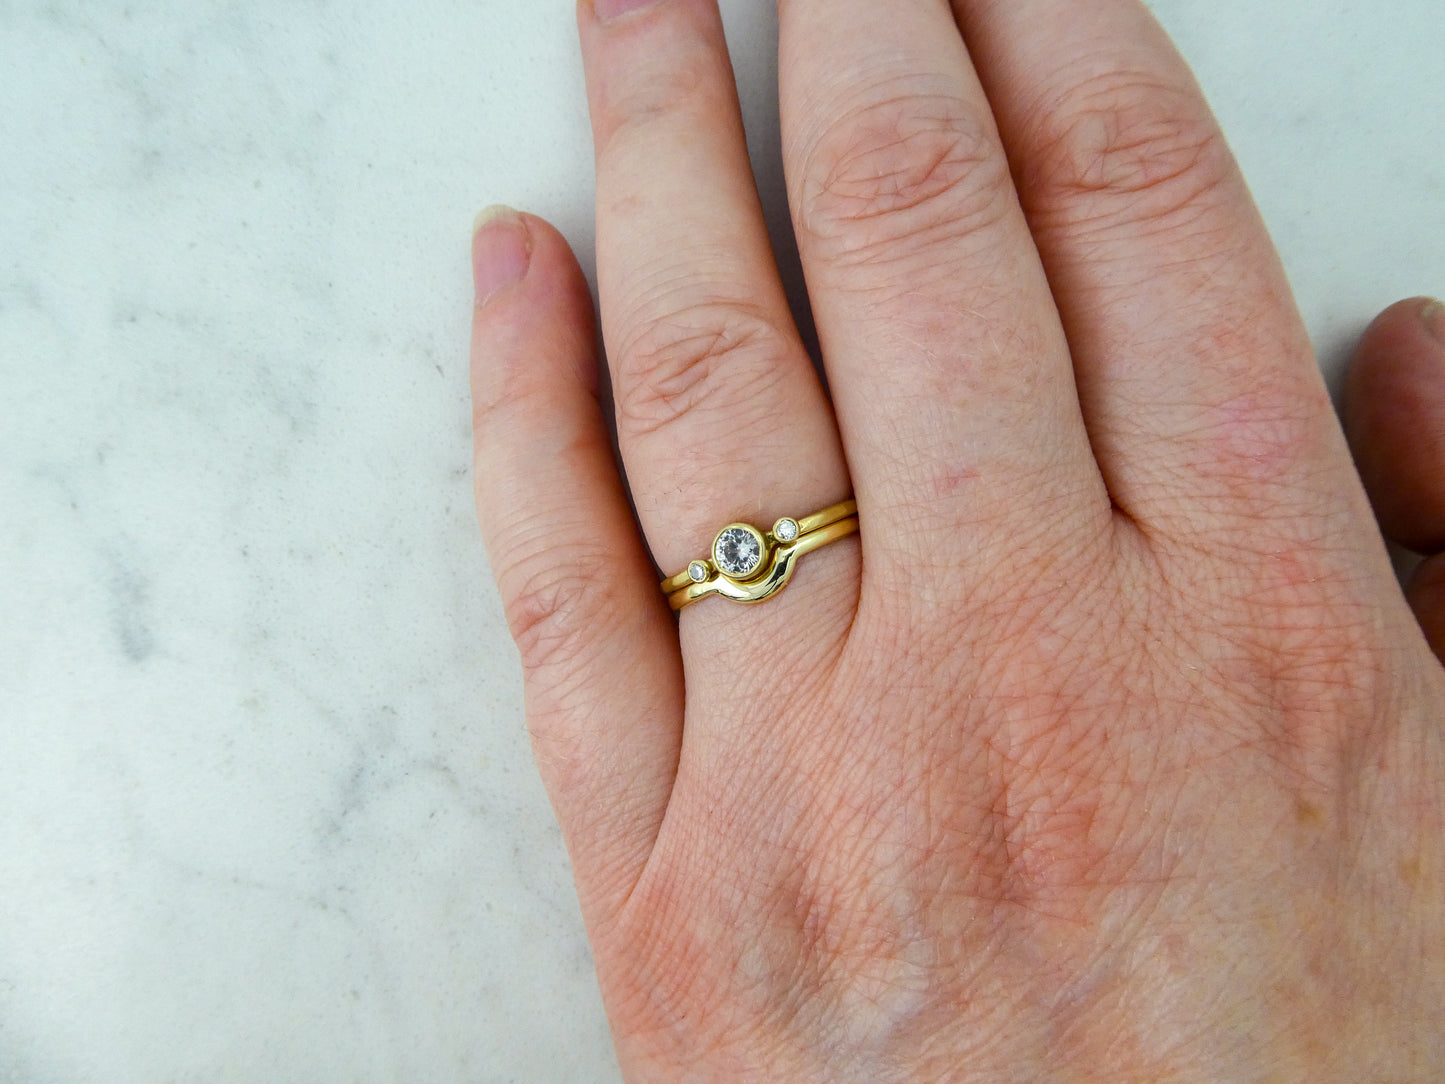 Three-Stone White Sapphire and Diamond Ring in 14k Gold | Made to order in yellow, rose or white gold